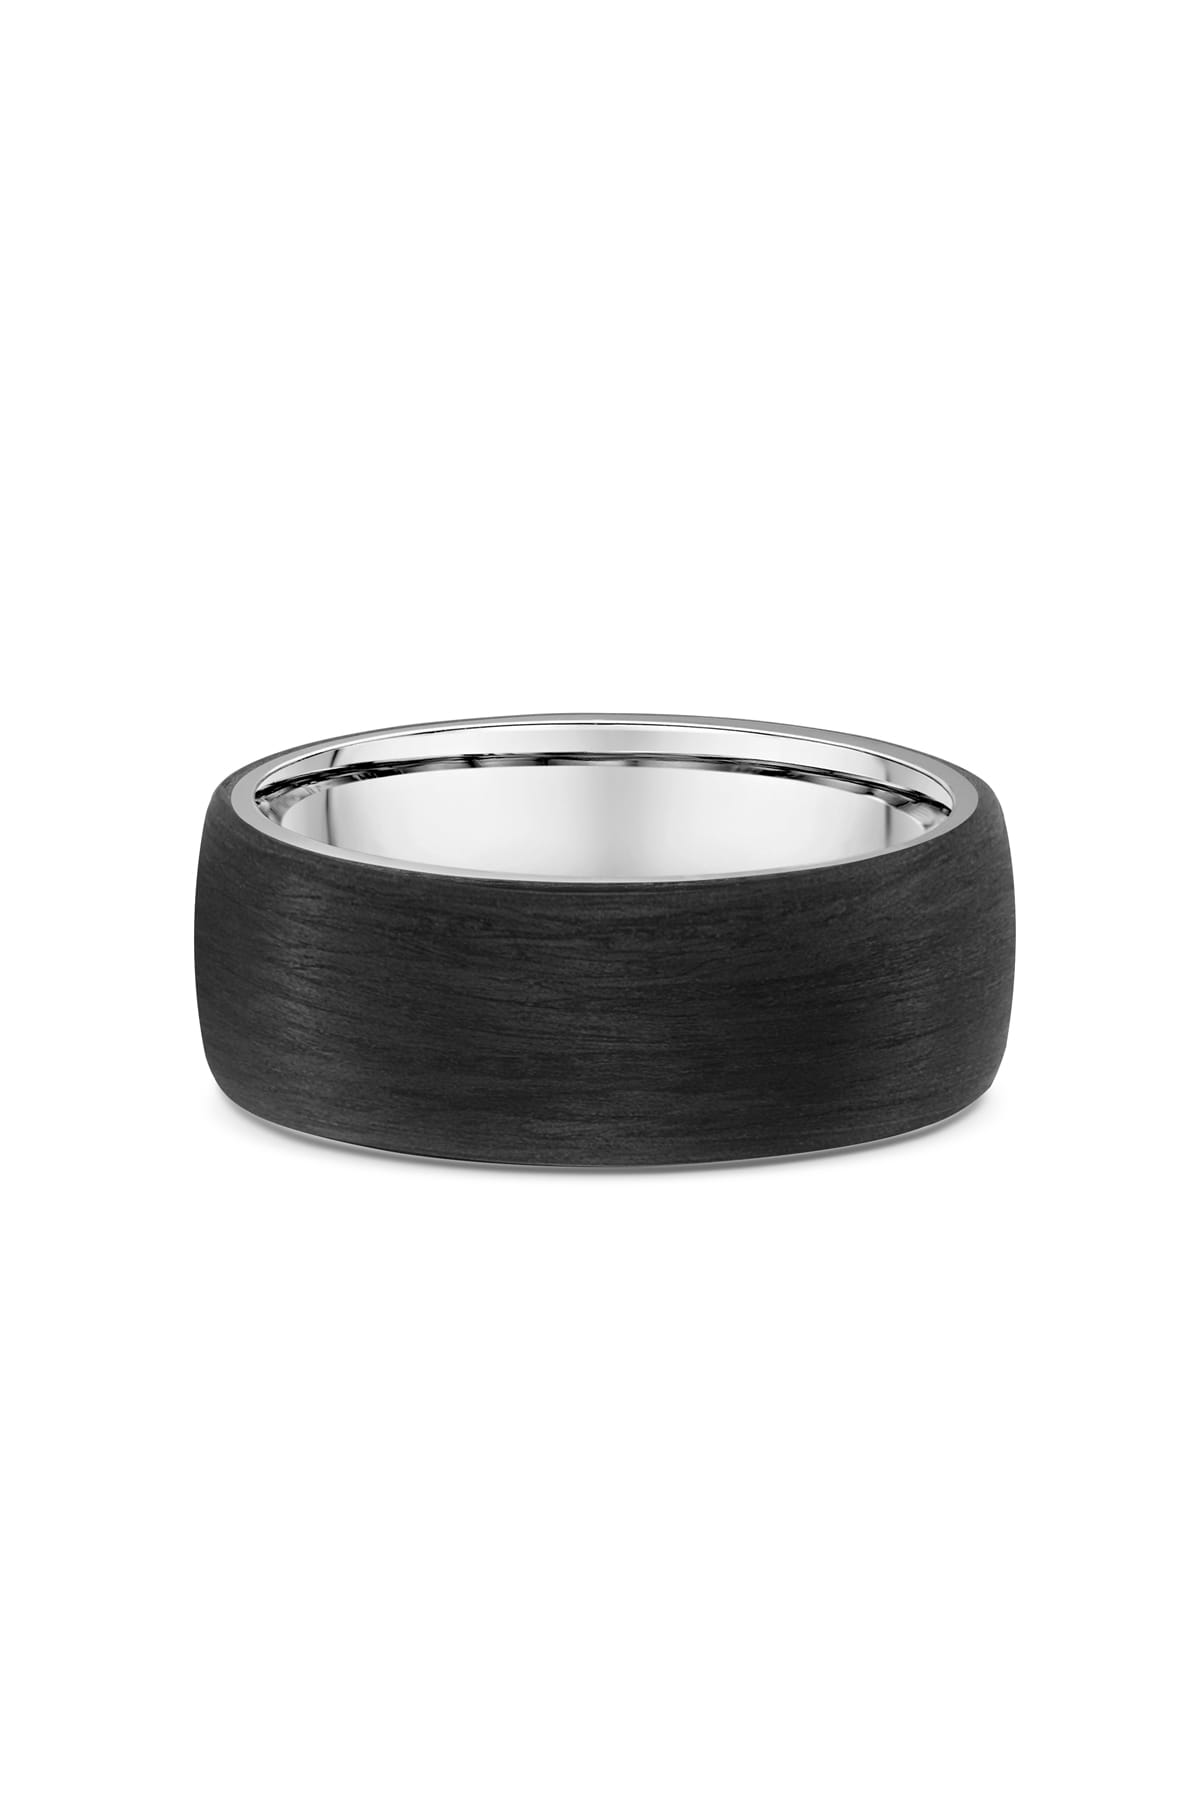 Men's Carbon Fibre And White Gold Wedding Ring available at LeGassick Diamonds and Jewellery Gold Coast, Australia.